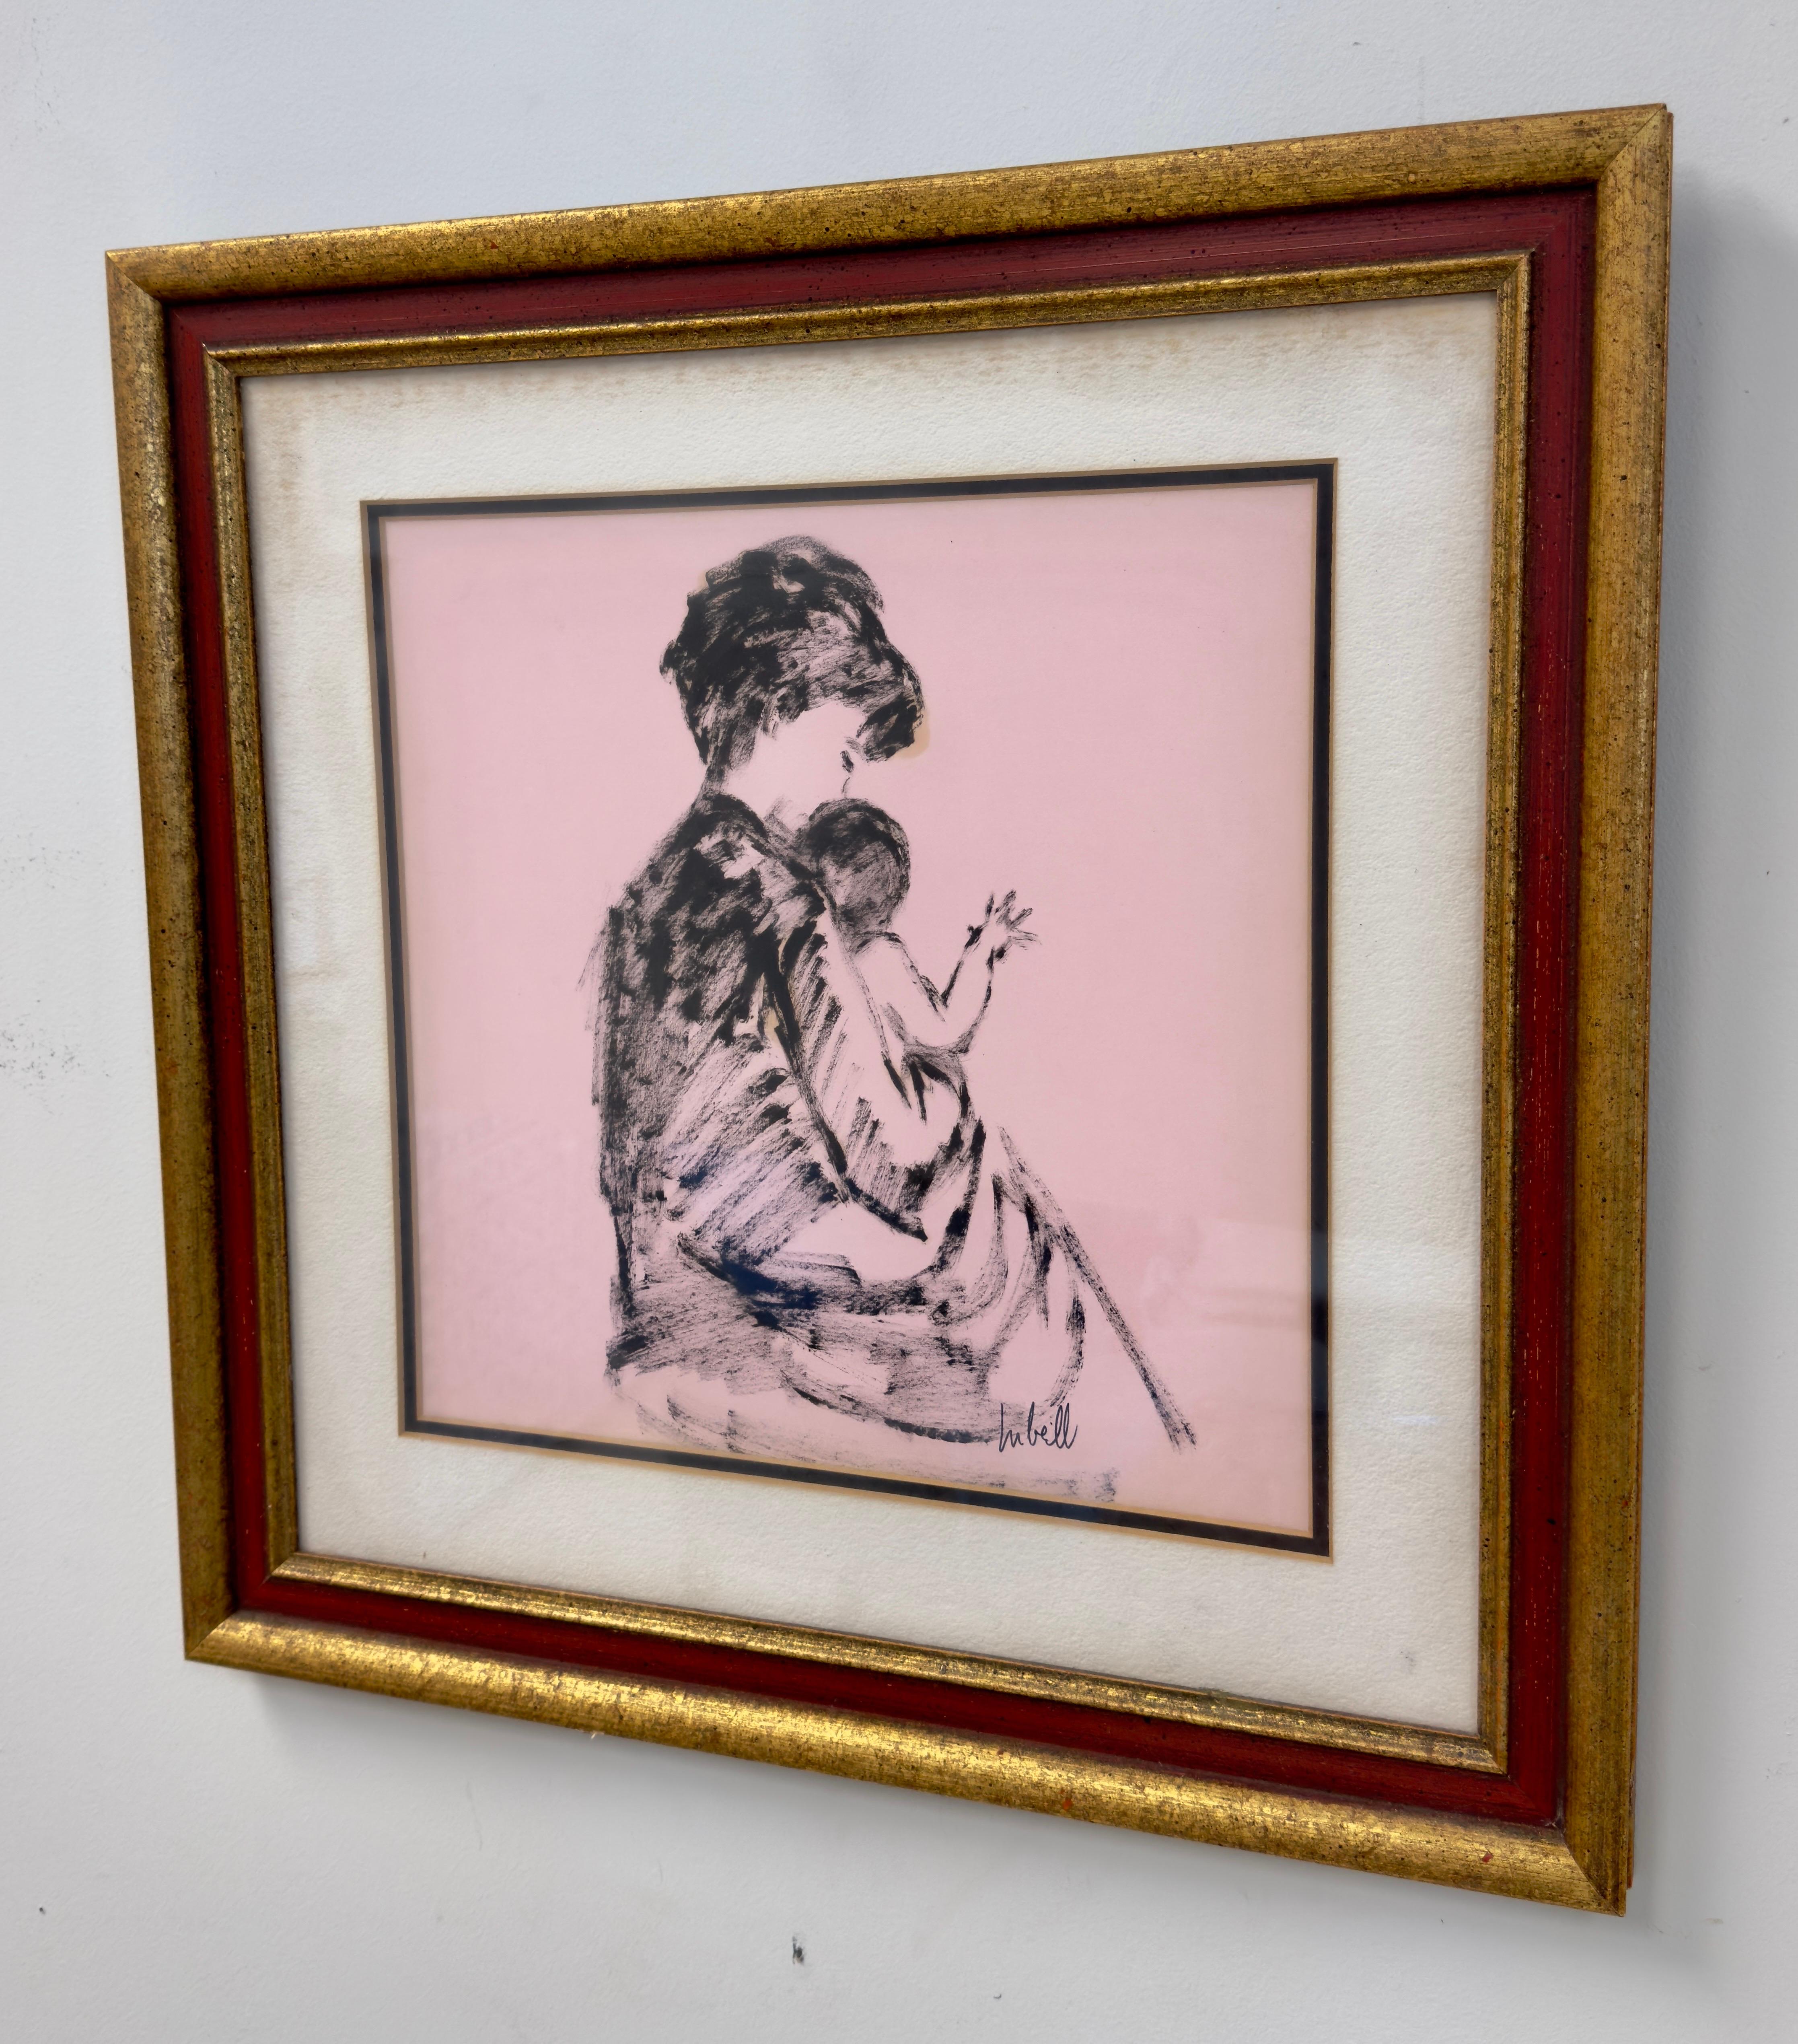 A  beautiful lithograph with a pink background depicting the back of a  woman holding a child. The lithograph is signed by the artist 